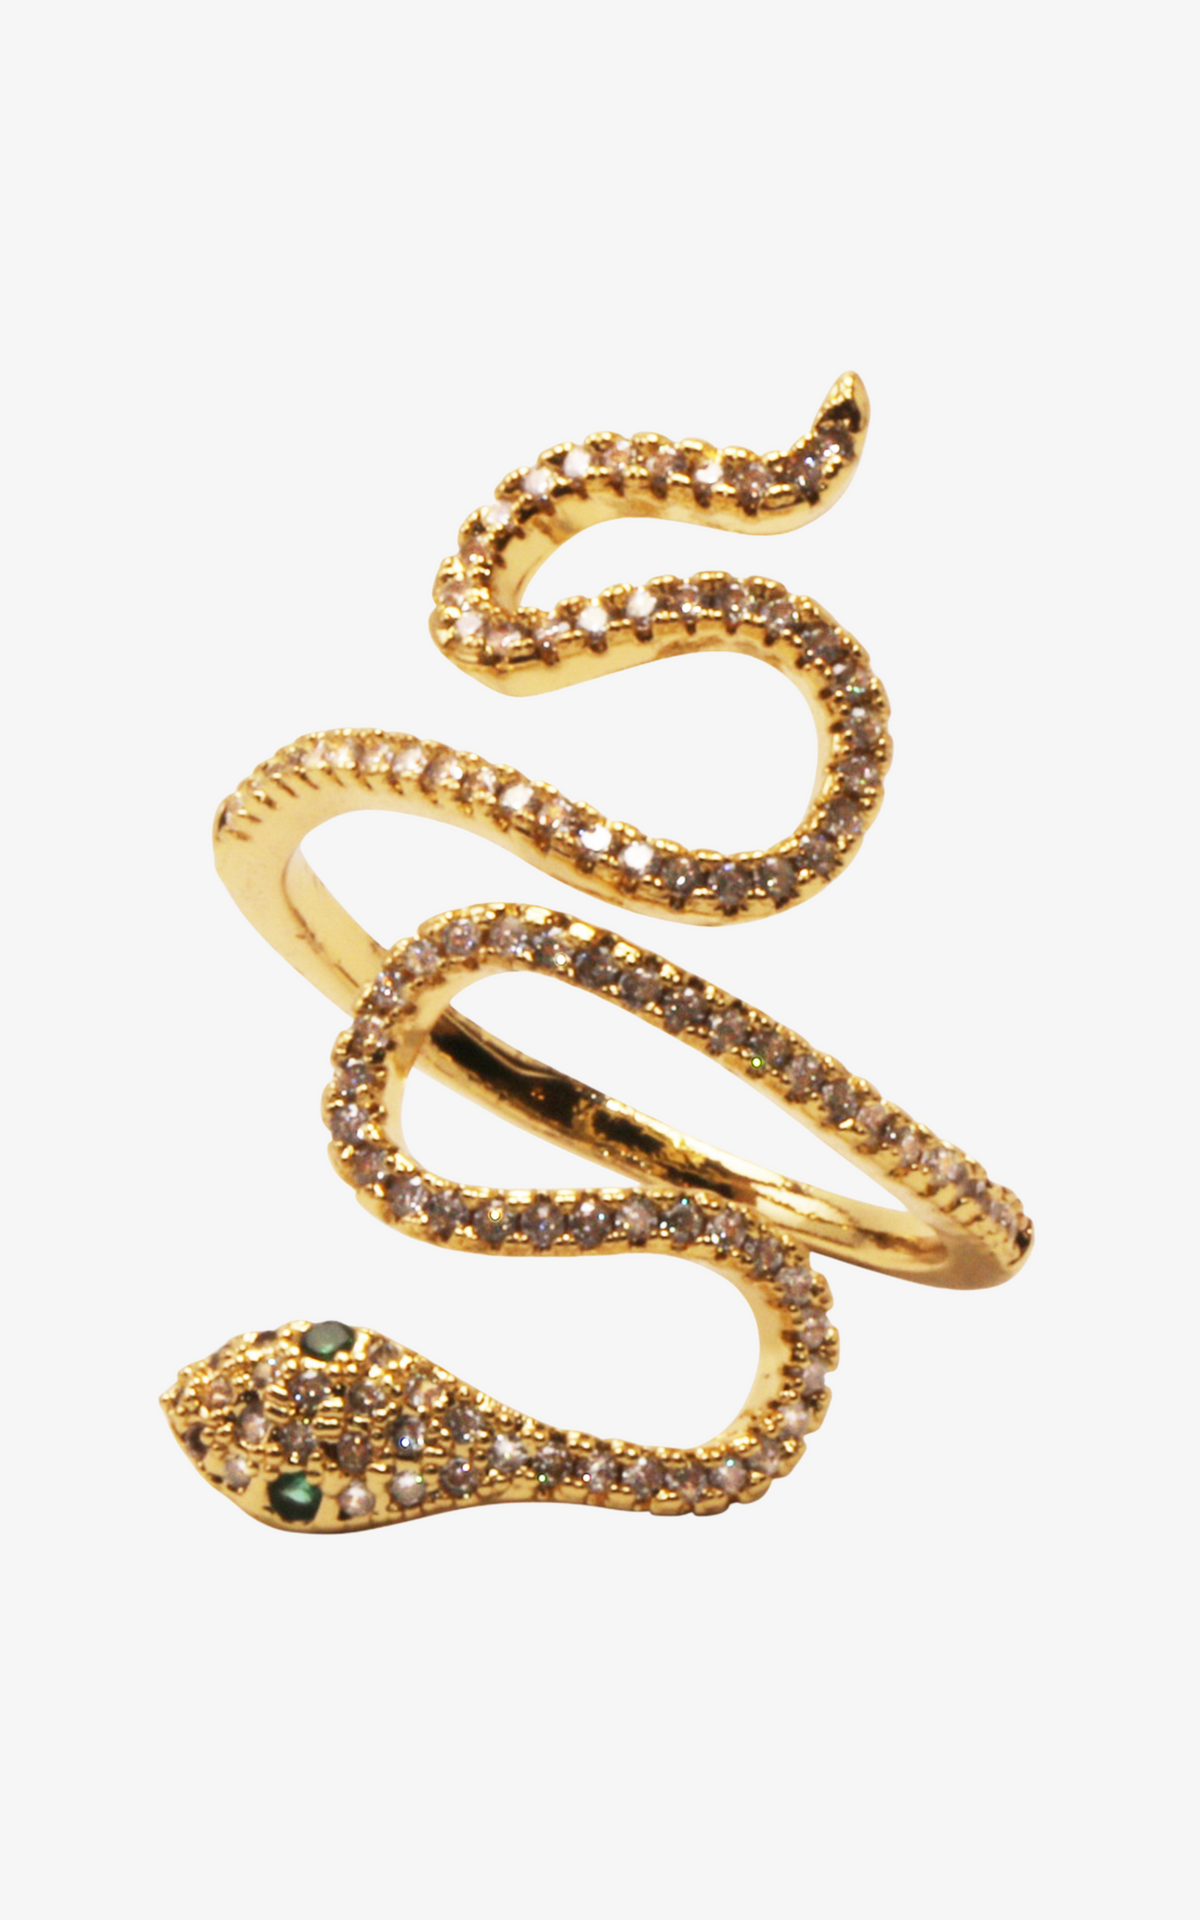 Jeweled Snake Cocktail Ring